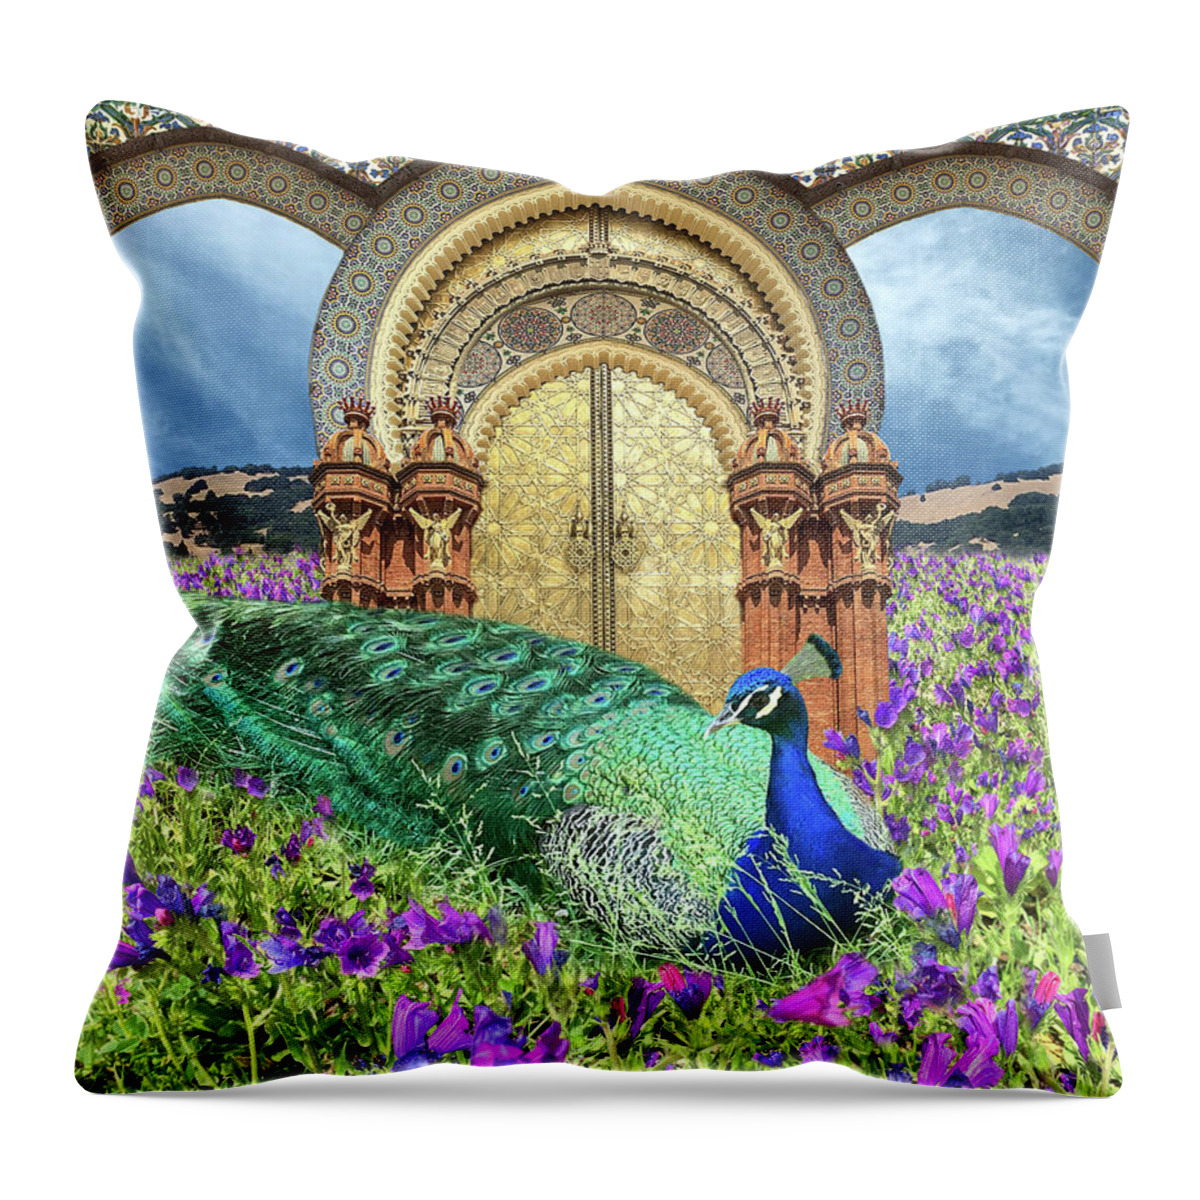 Peacock Throw Pillow featuring the digital art Peacock Gate by Lucy Arnold